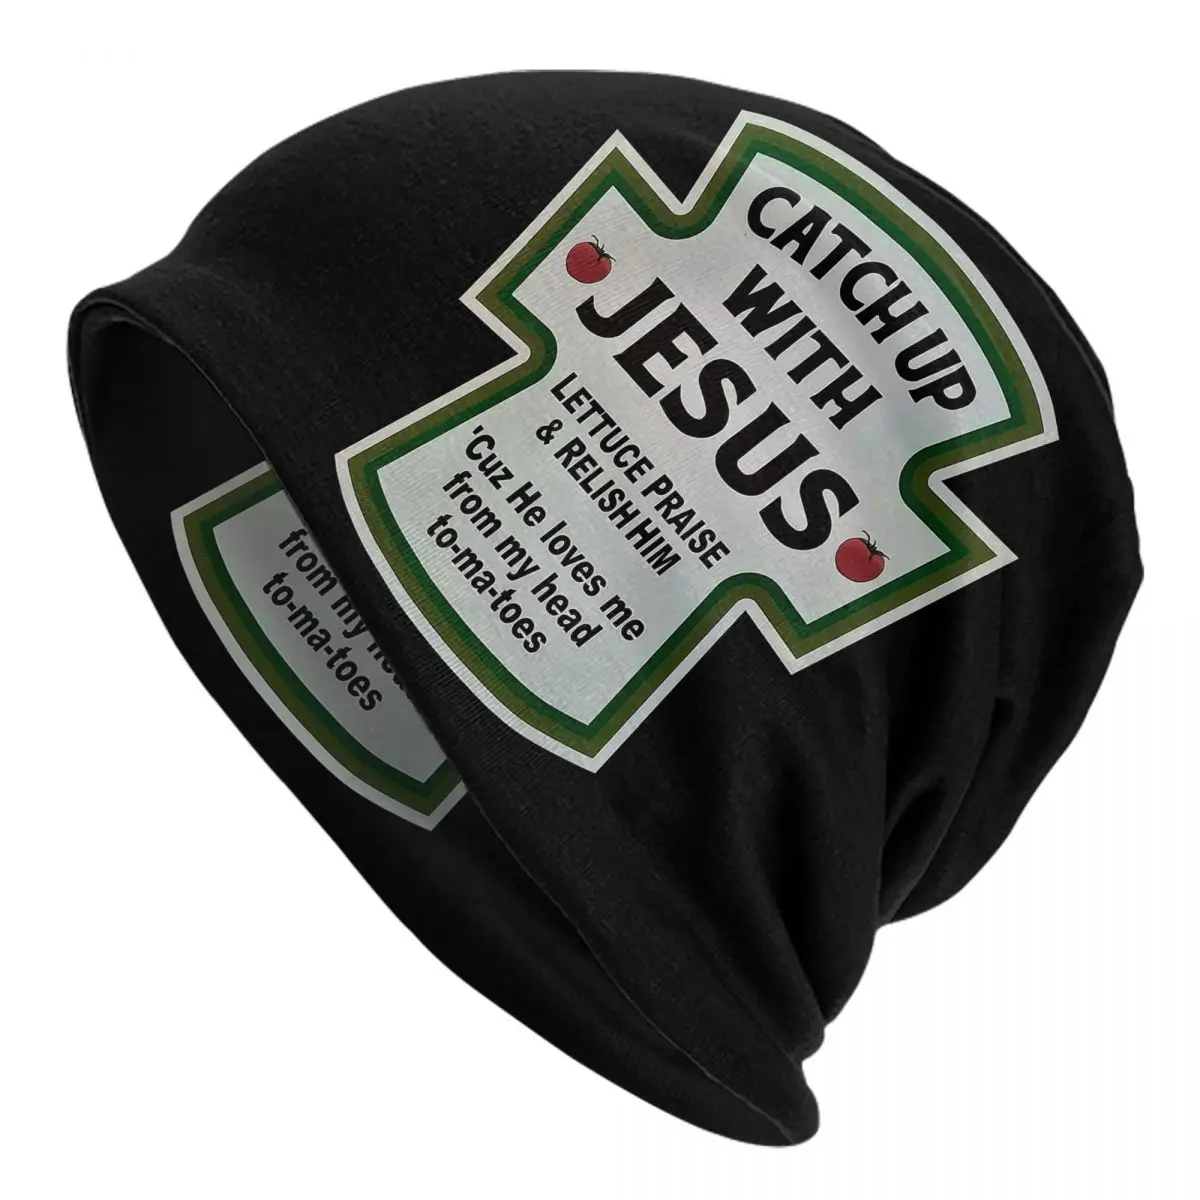 CATCH UP With JESUS Adult Men's Women's Knit Hat Keep warm winter Funny knitted hat